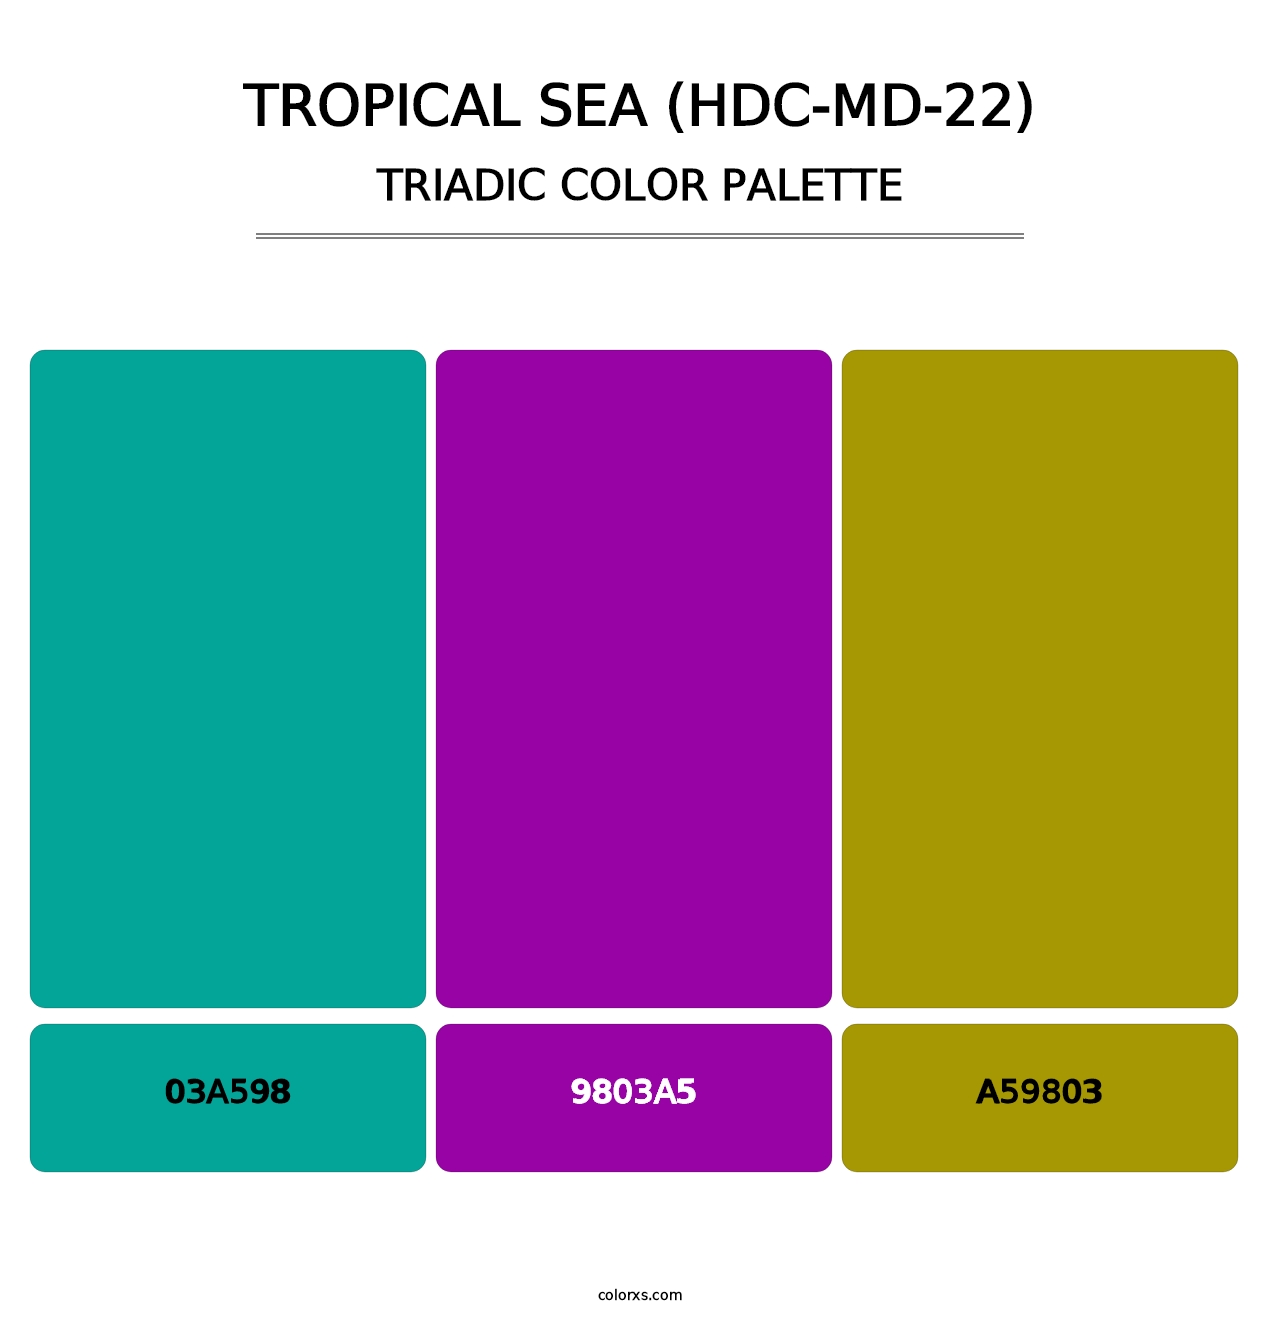 Tropical Sea (HDC-MD-22) - Triadic Color Palette